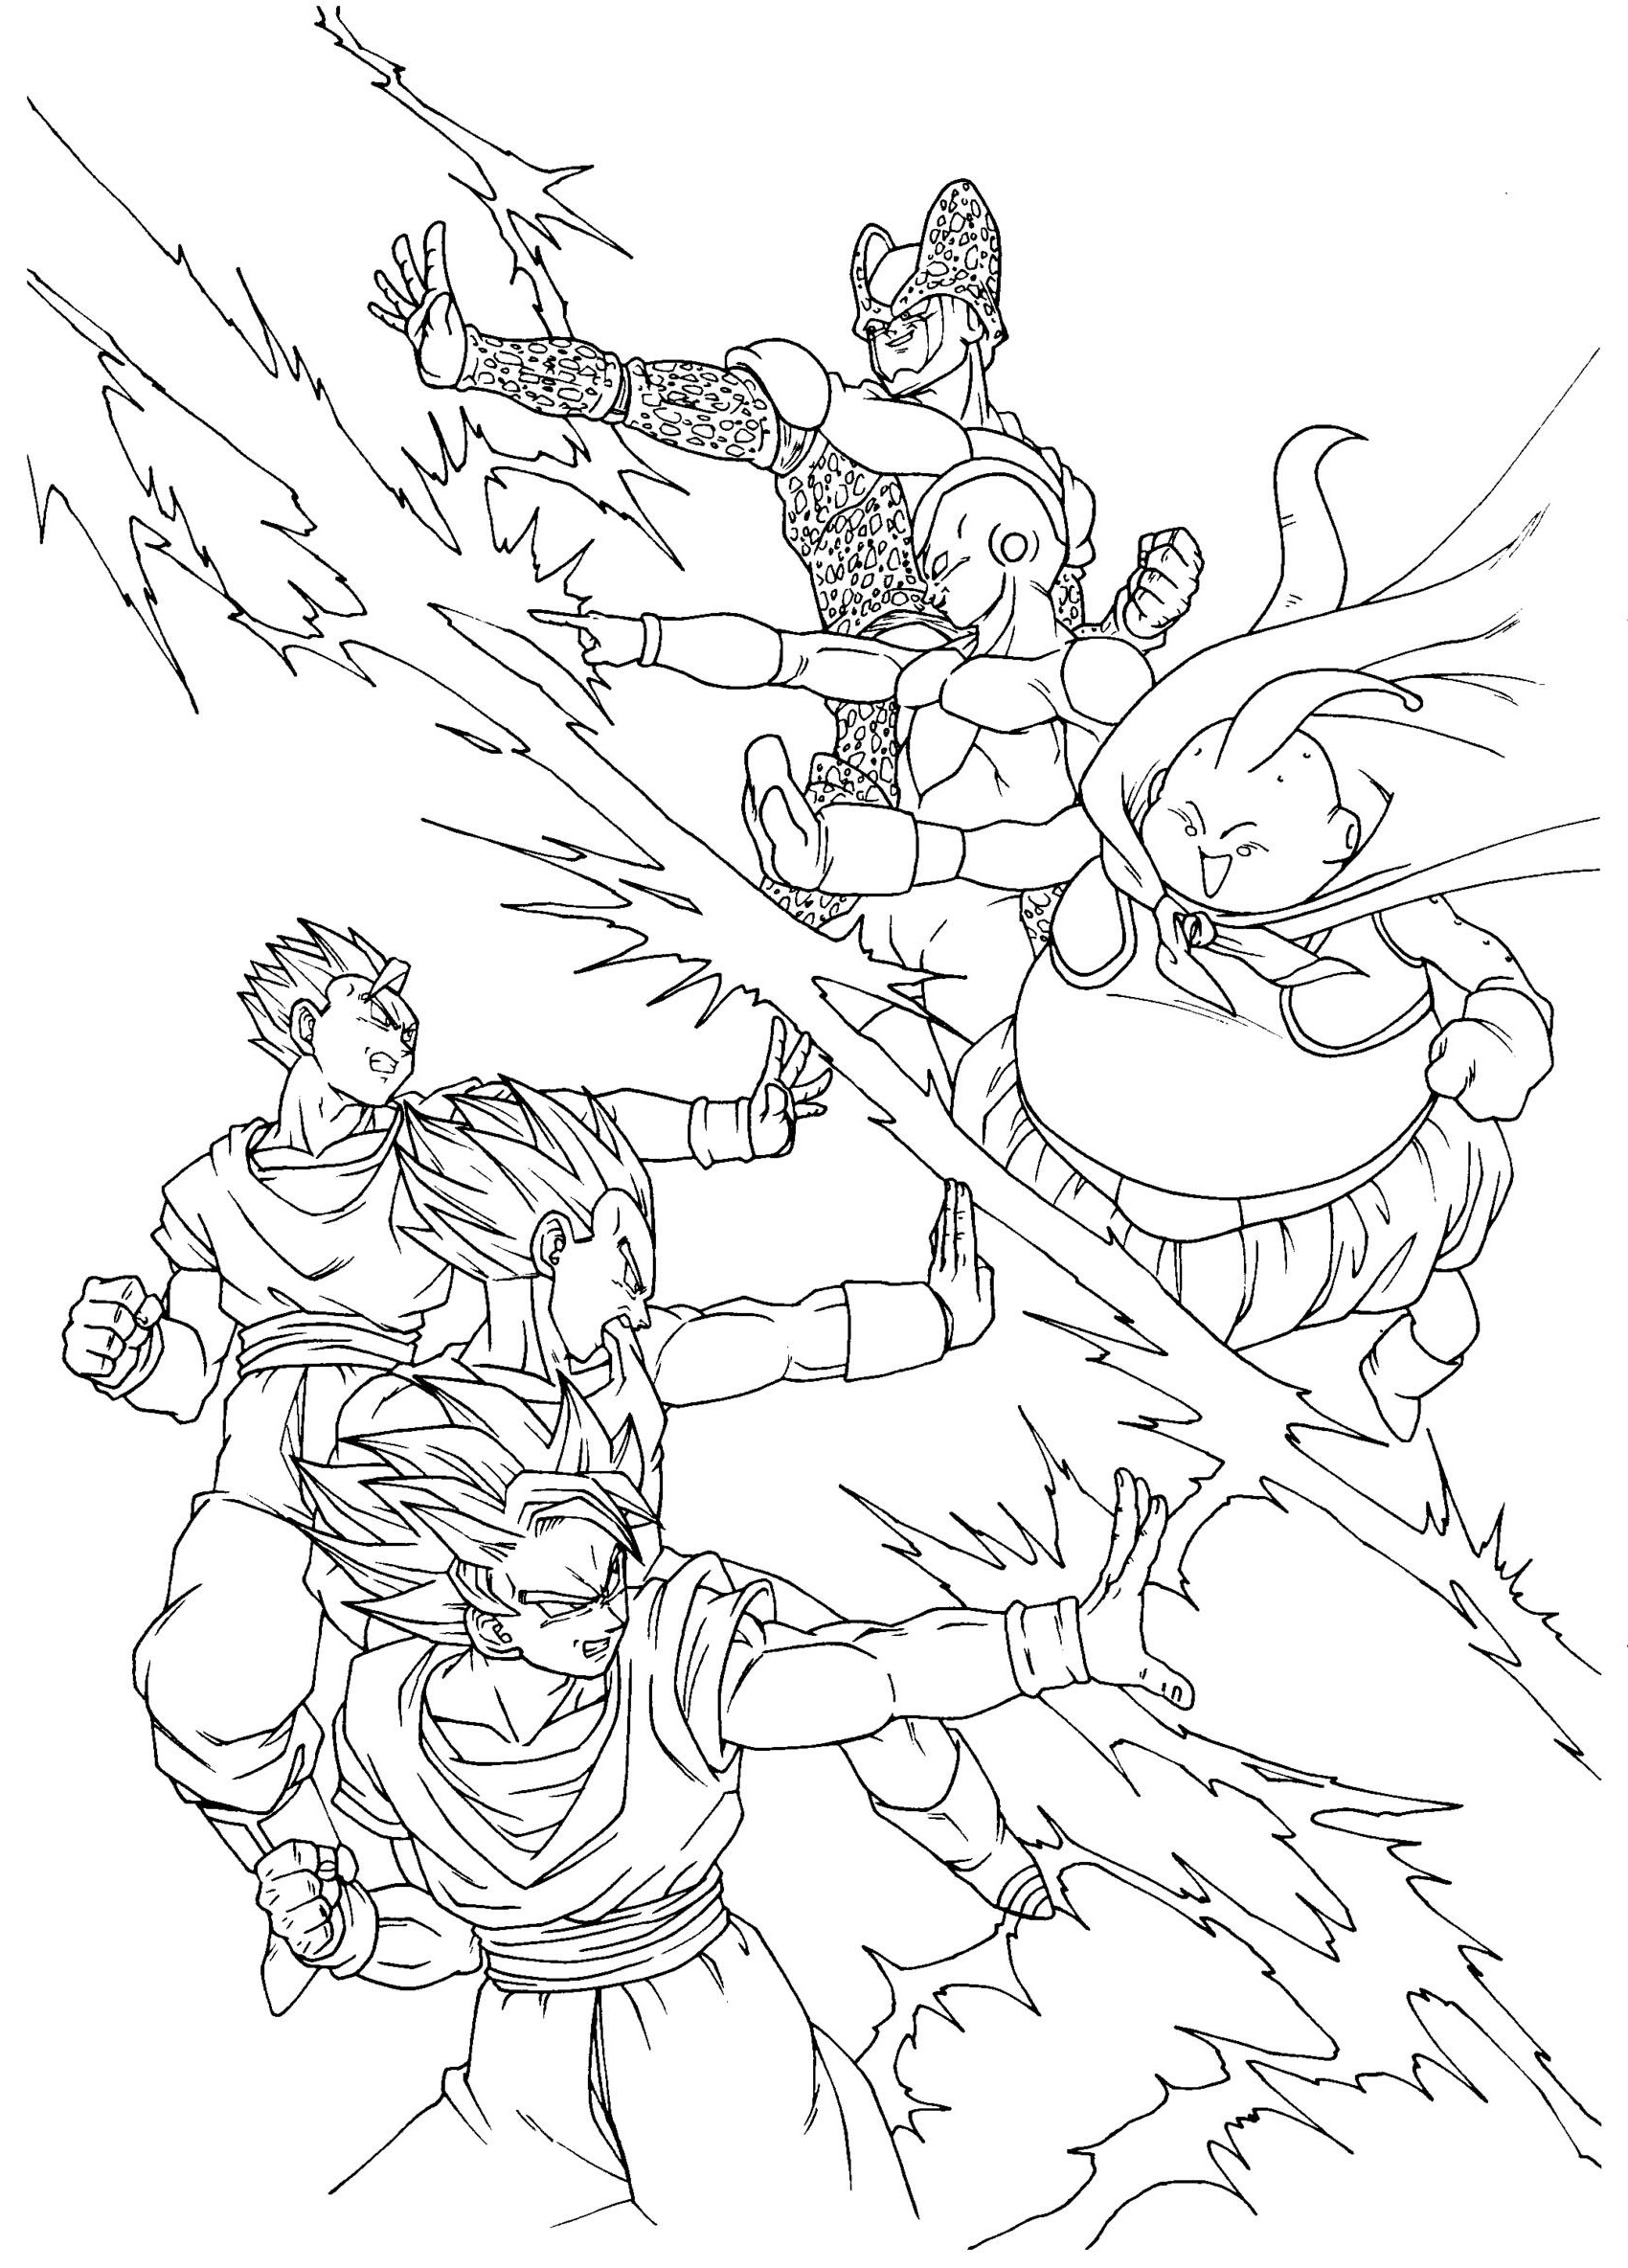 Coloriages Dragon Ball Z Élégant Image songoku Ve A songohan Against Cell Boo and Freezer